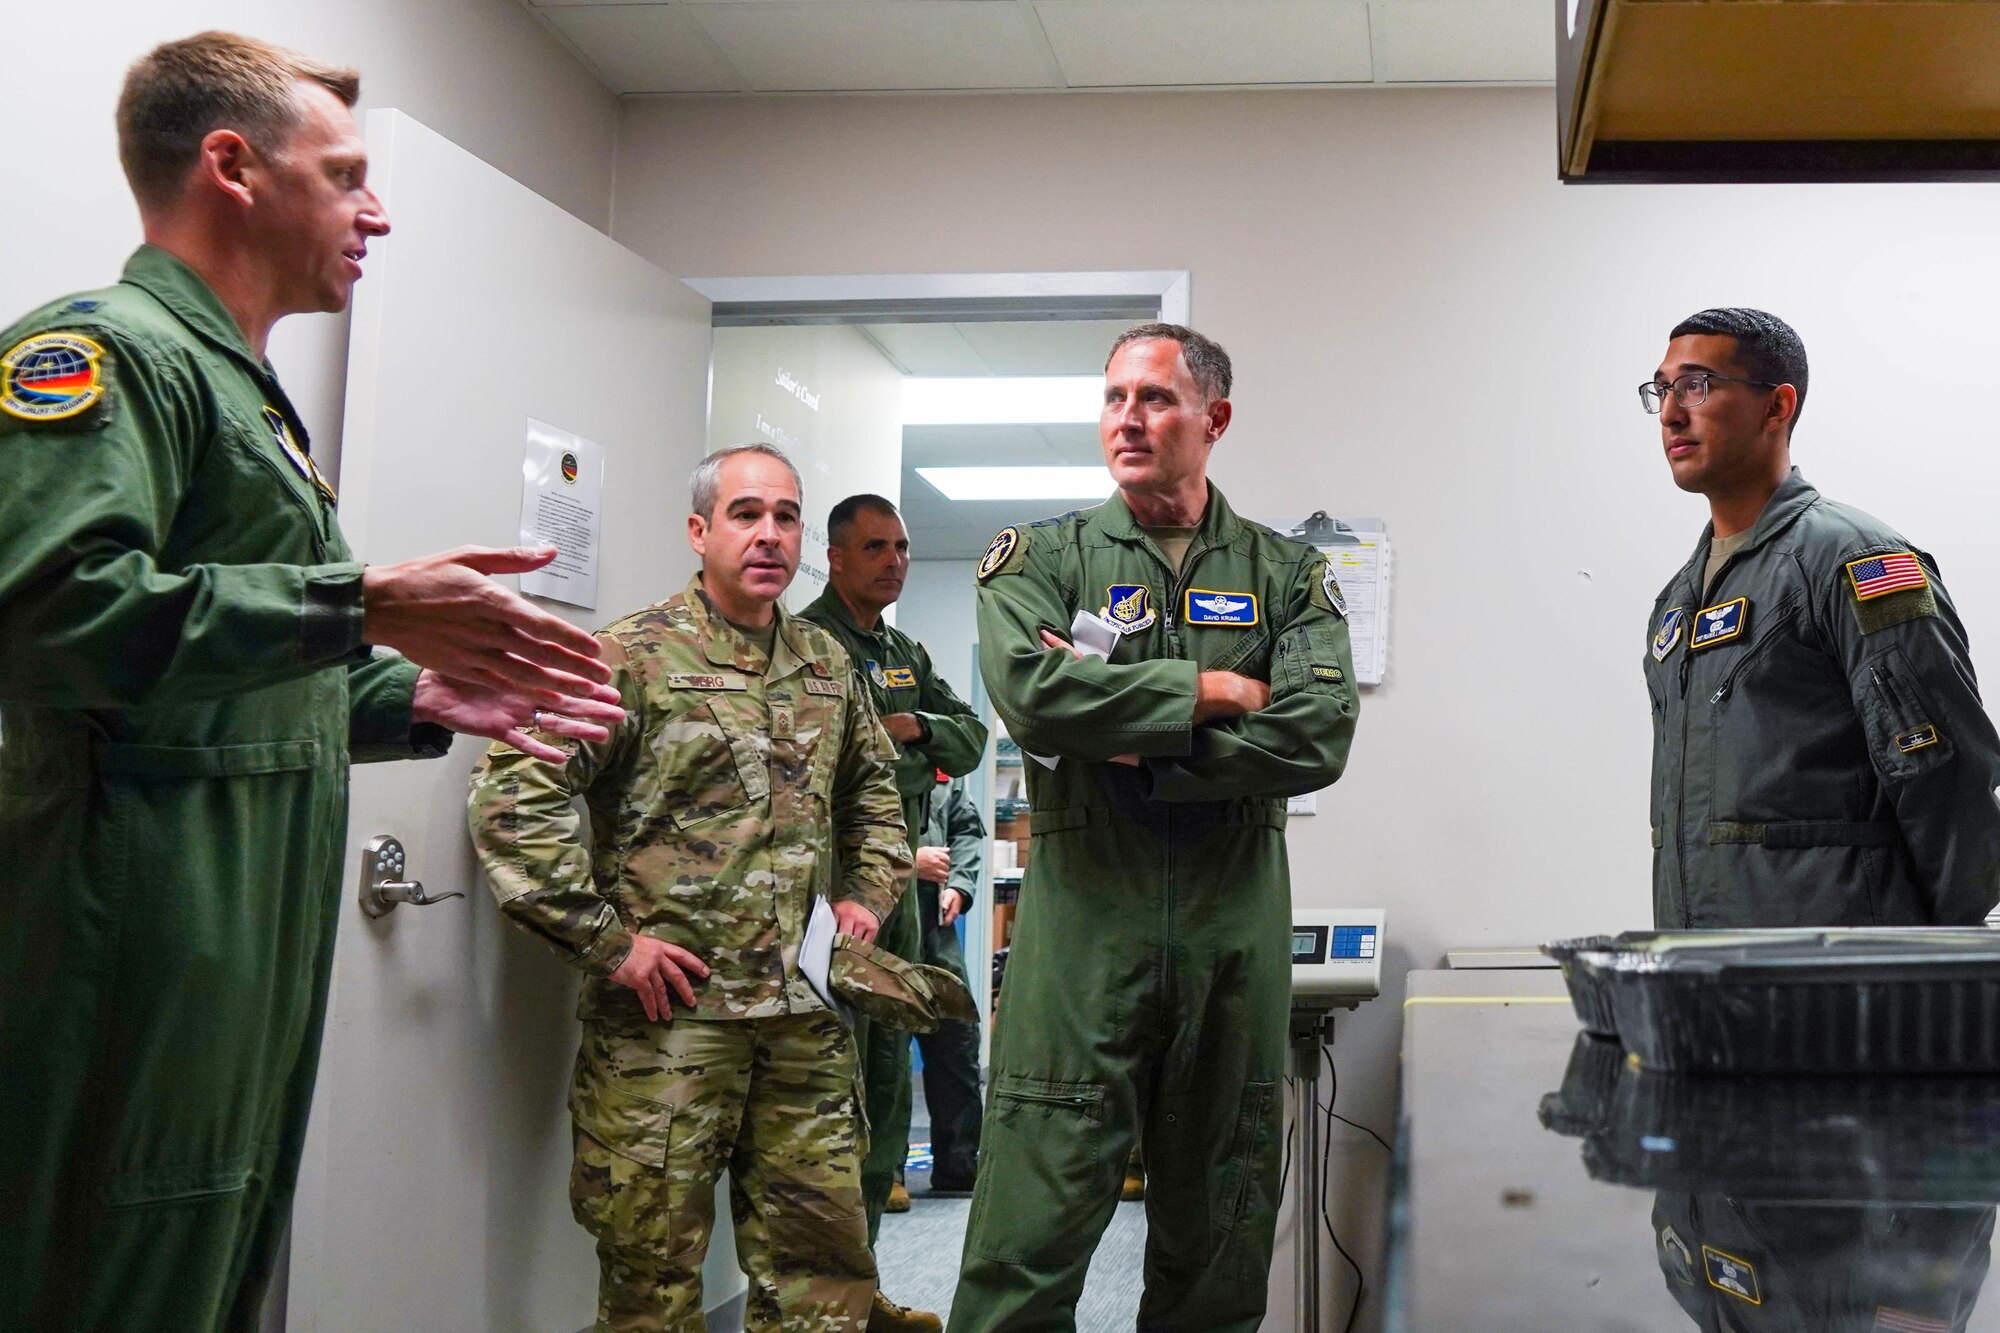 U.S. Air Force Lt. Gen. David A. Krumm, commander of Alaskan North American Aerospace Defense Command Region, Alaskan Command, and Eleventh Air Force, talks with Airmen assigned to the 15th Wing during a visit to Joint Base Pearl Harbor-Hickam, Hawaii, July 20, 2021.  Krumm visited several squadrons around the 15th Wing to gain an in-depth exposure to their unique mission and how the wing contributes to the Indo-Pacific region’s security and stability. (U.S Air Force photo by Airman 1st Class Makensie Cooper)